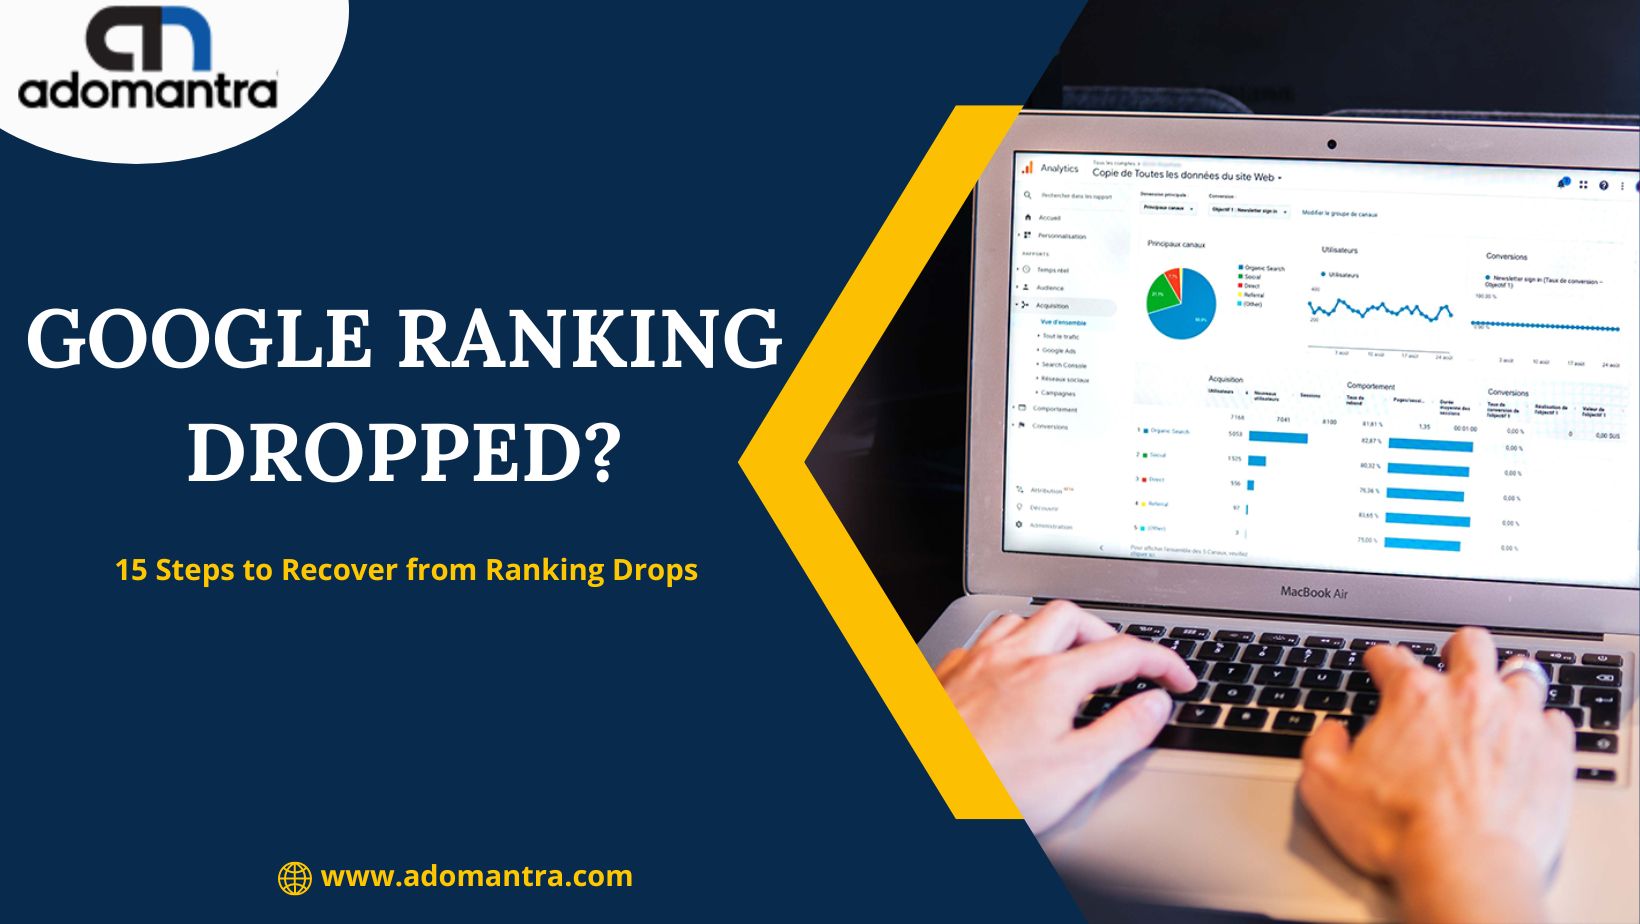 Google Ranking Dropped? 15 Steps to Recover from Ranking Drops